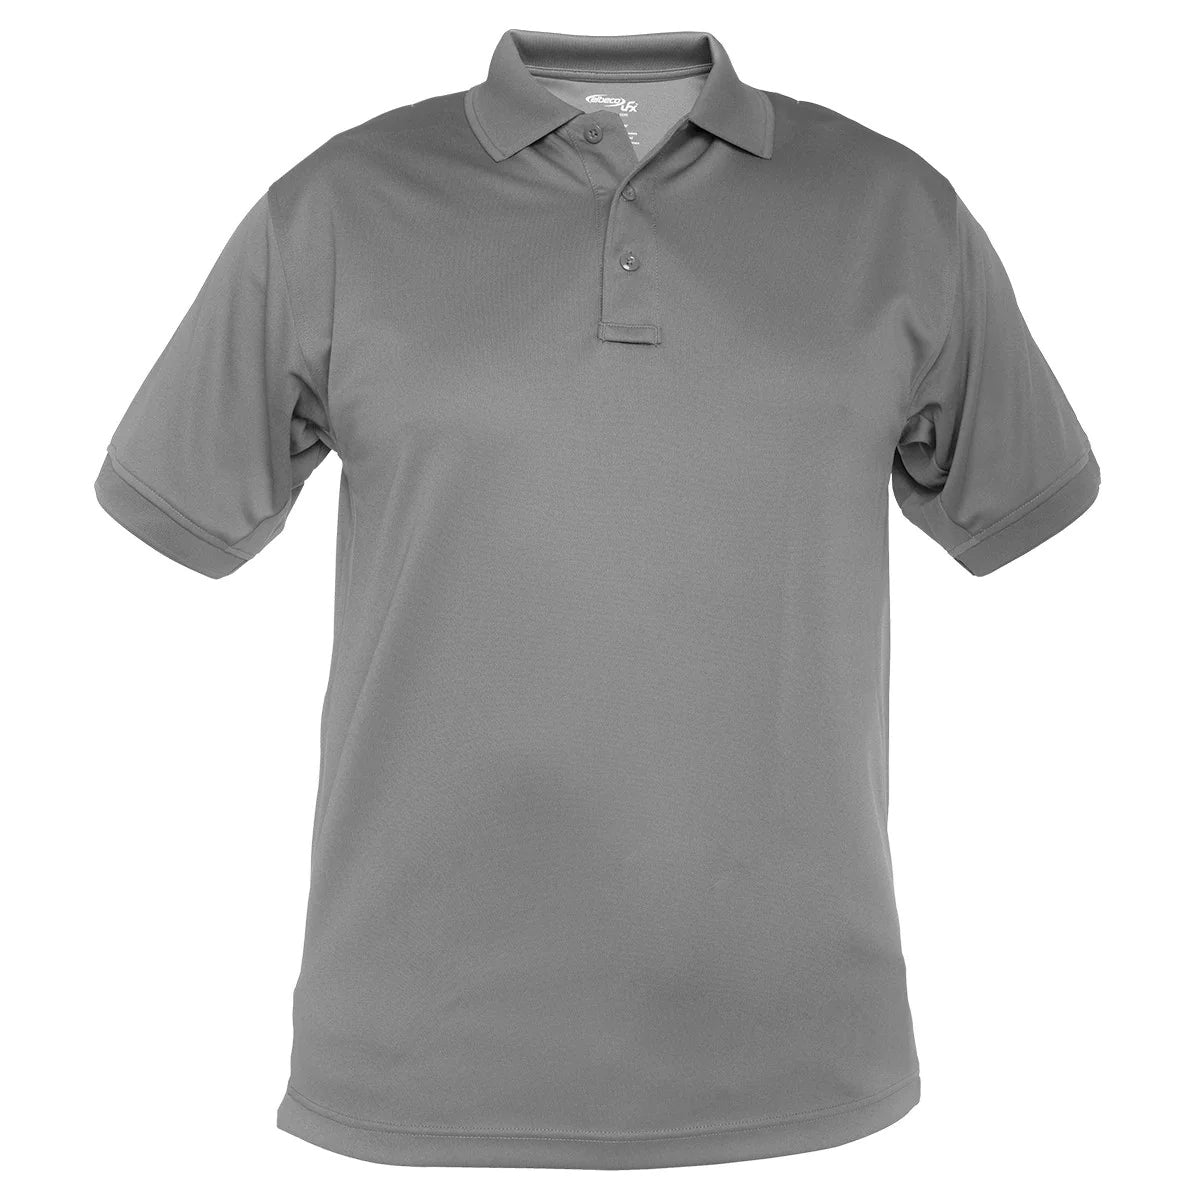 Elbeco Ufx Short Sleeve Tactical Polo (NEED TO ADD OLIVE DRAB AND LIGHT BLUE)-Tac Essentials